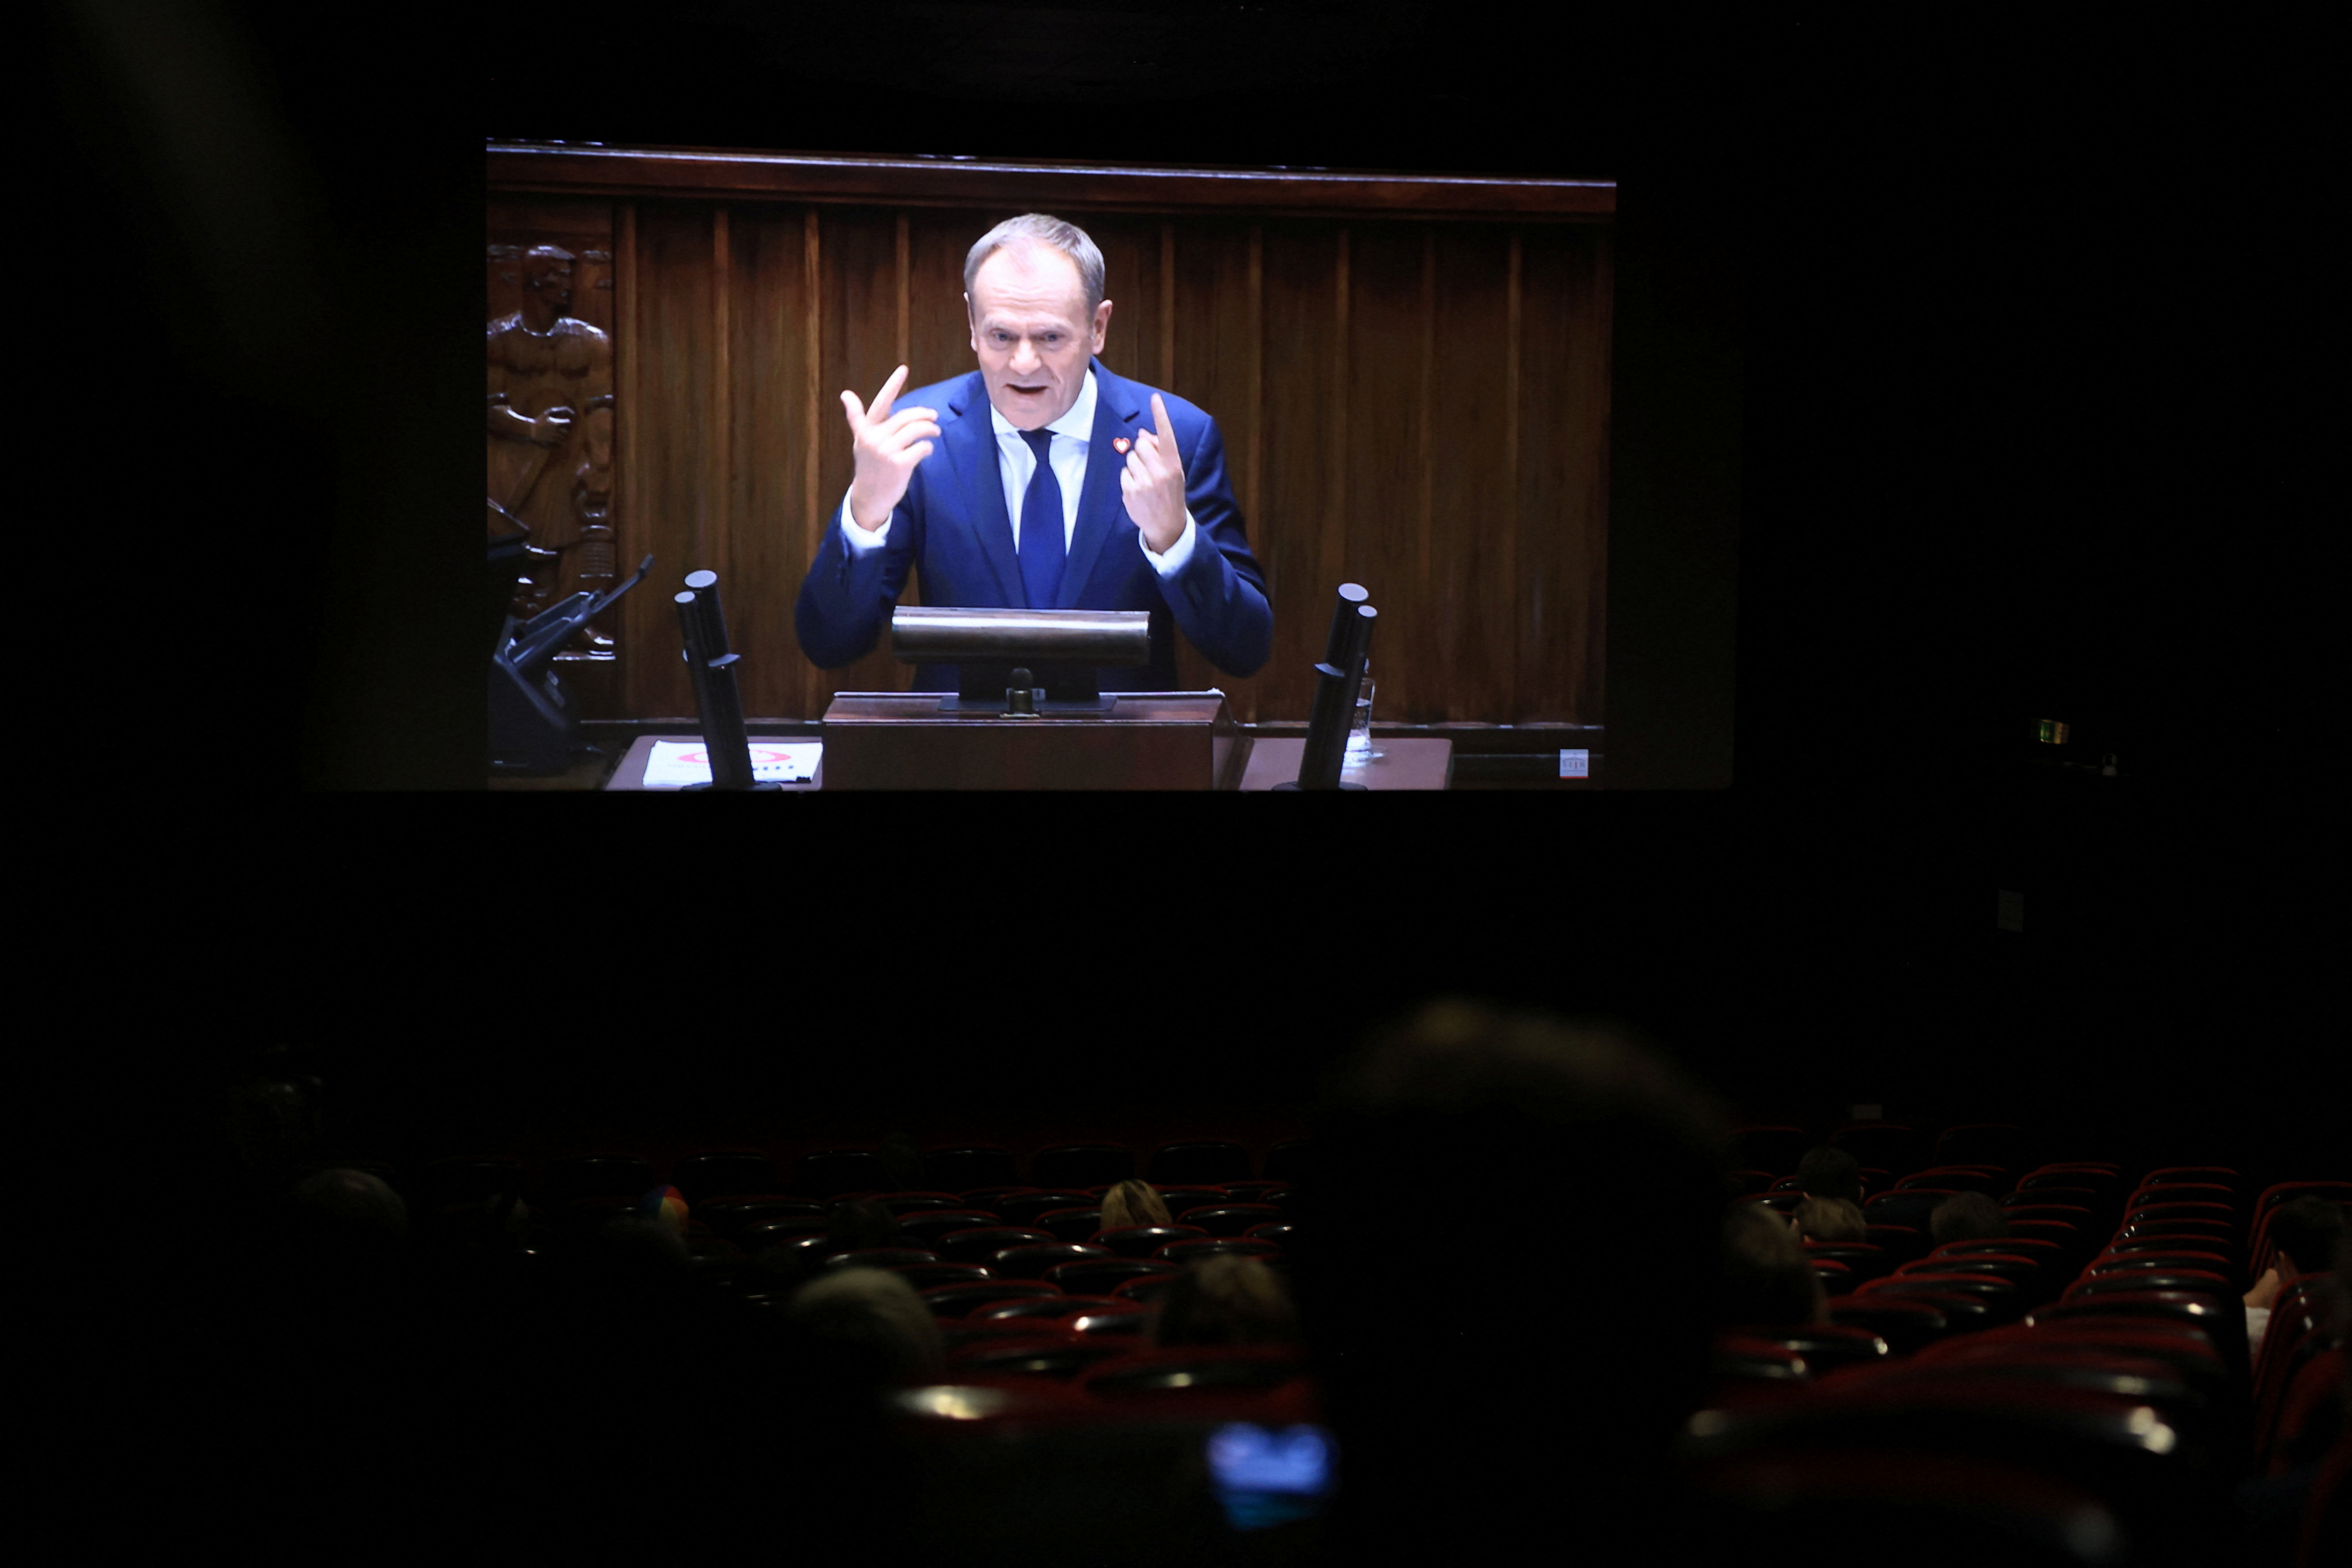 Newly appointed Polish Prime Minister Donald Tusk presenting his government's programme in Parliament is displayed on the screen at the cinema in Warsaw